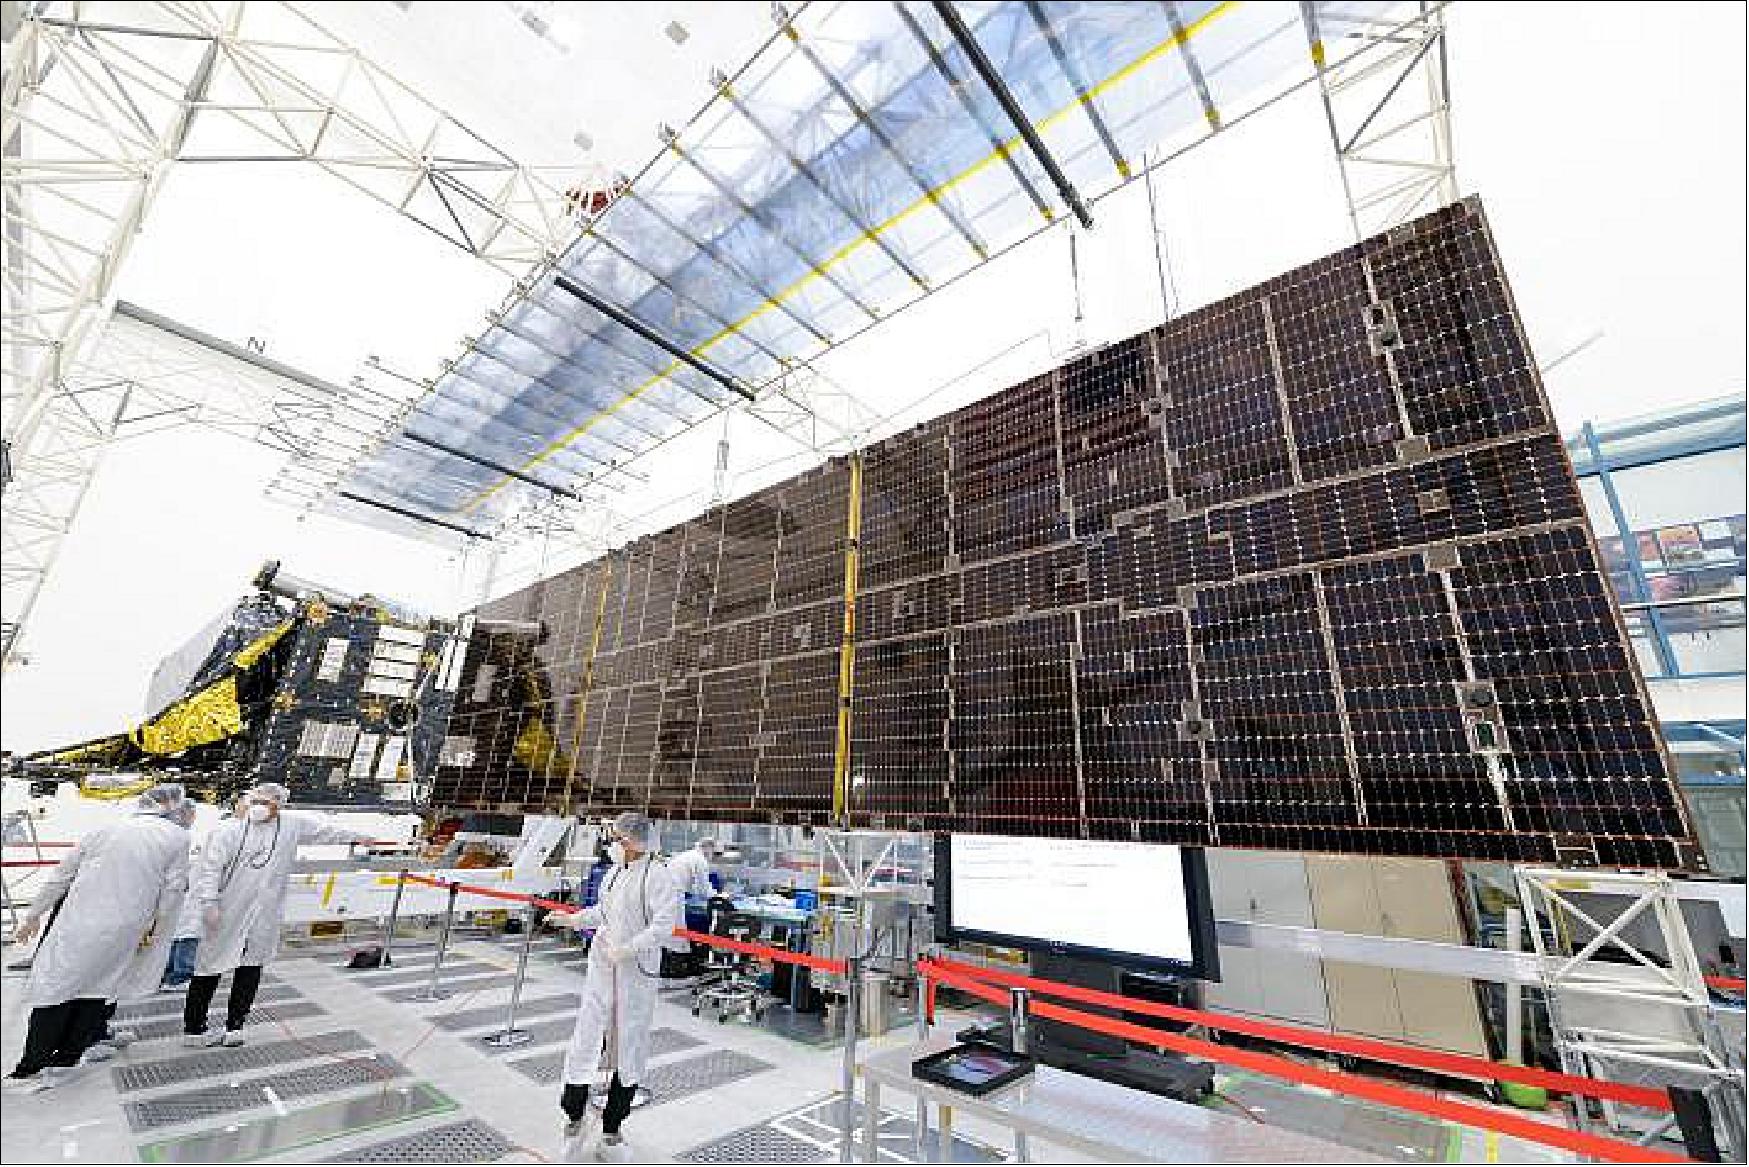 Figure 7: Engineers at NASA/JPL successfully deployed a solar array installed on the agency's Psyche spacecraft. It was one of two deployed during testing in the Lab's High Bay 2 clean room in late February 2022. The twin arrays are together about 75 m2 – the largest ever deployed at JPL. Part of a solar electric propulsion system provided by Maxar Technologies, they will power the spacecraft on its 1.5 billion-mile (2.4 billion km) journey to the large, metal-rich asteroid Psyche (image credit: NASA/JPL-Caltech)